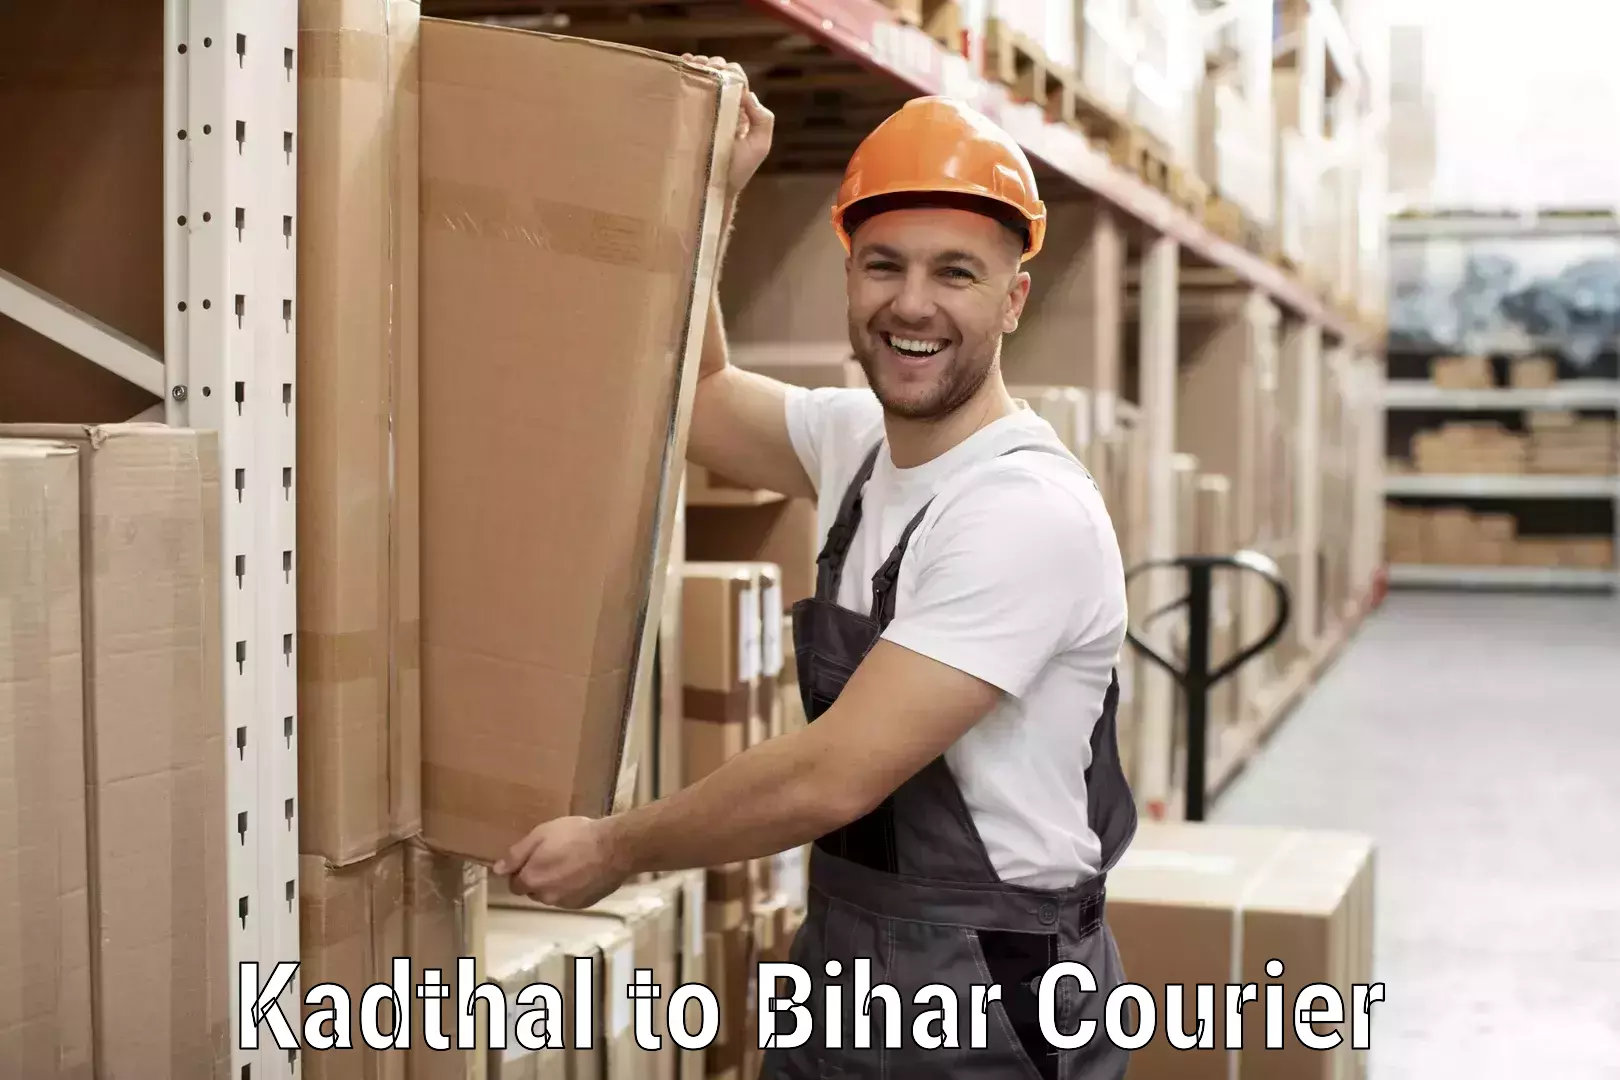 Courier service efficiency Kadthal to Aurai